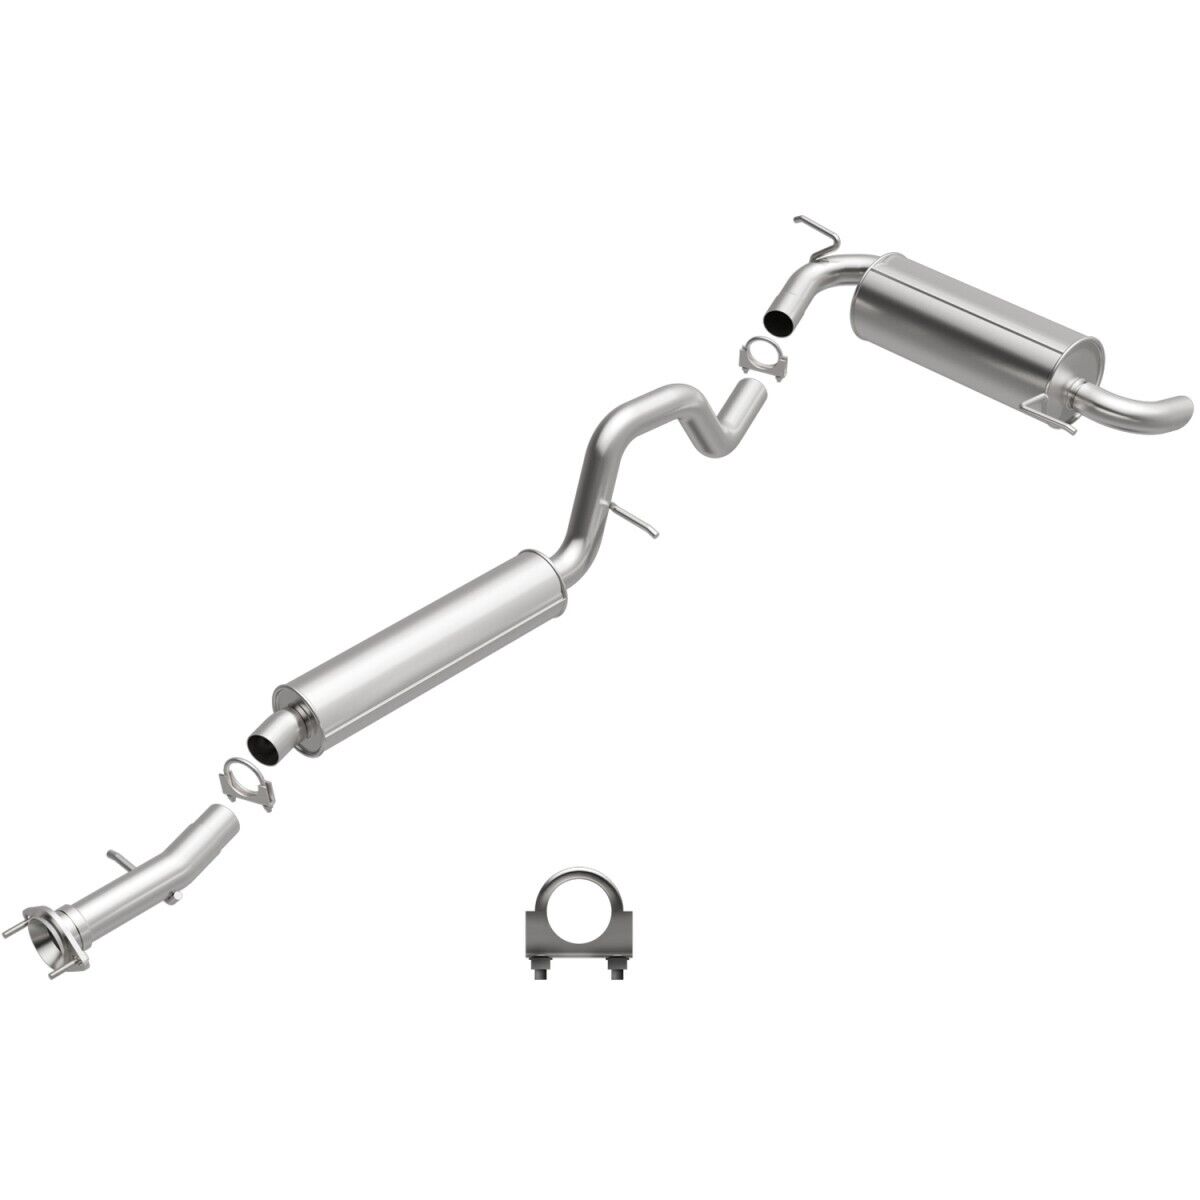 106-0351 BRExhaust Exhaust System for Hummer H3 2006-2007